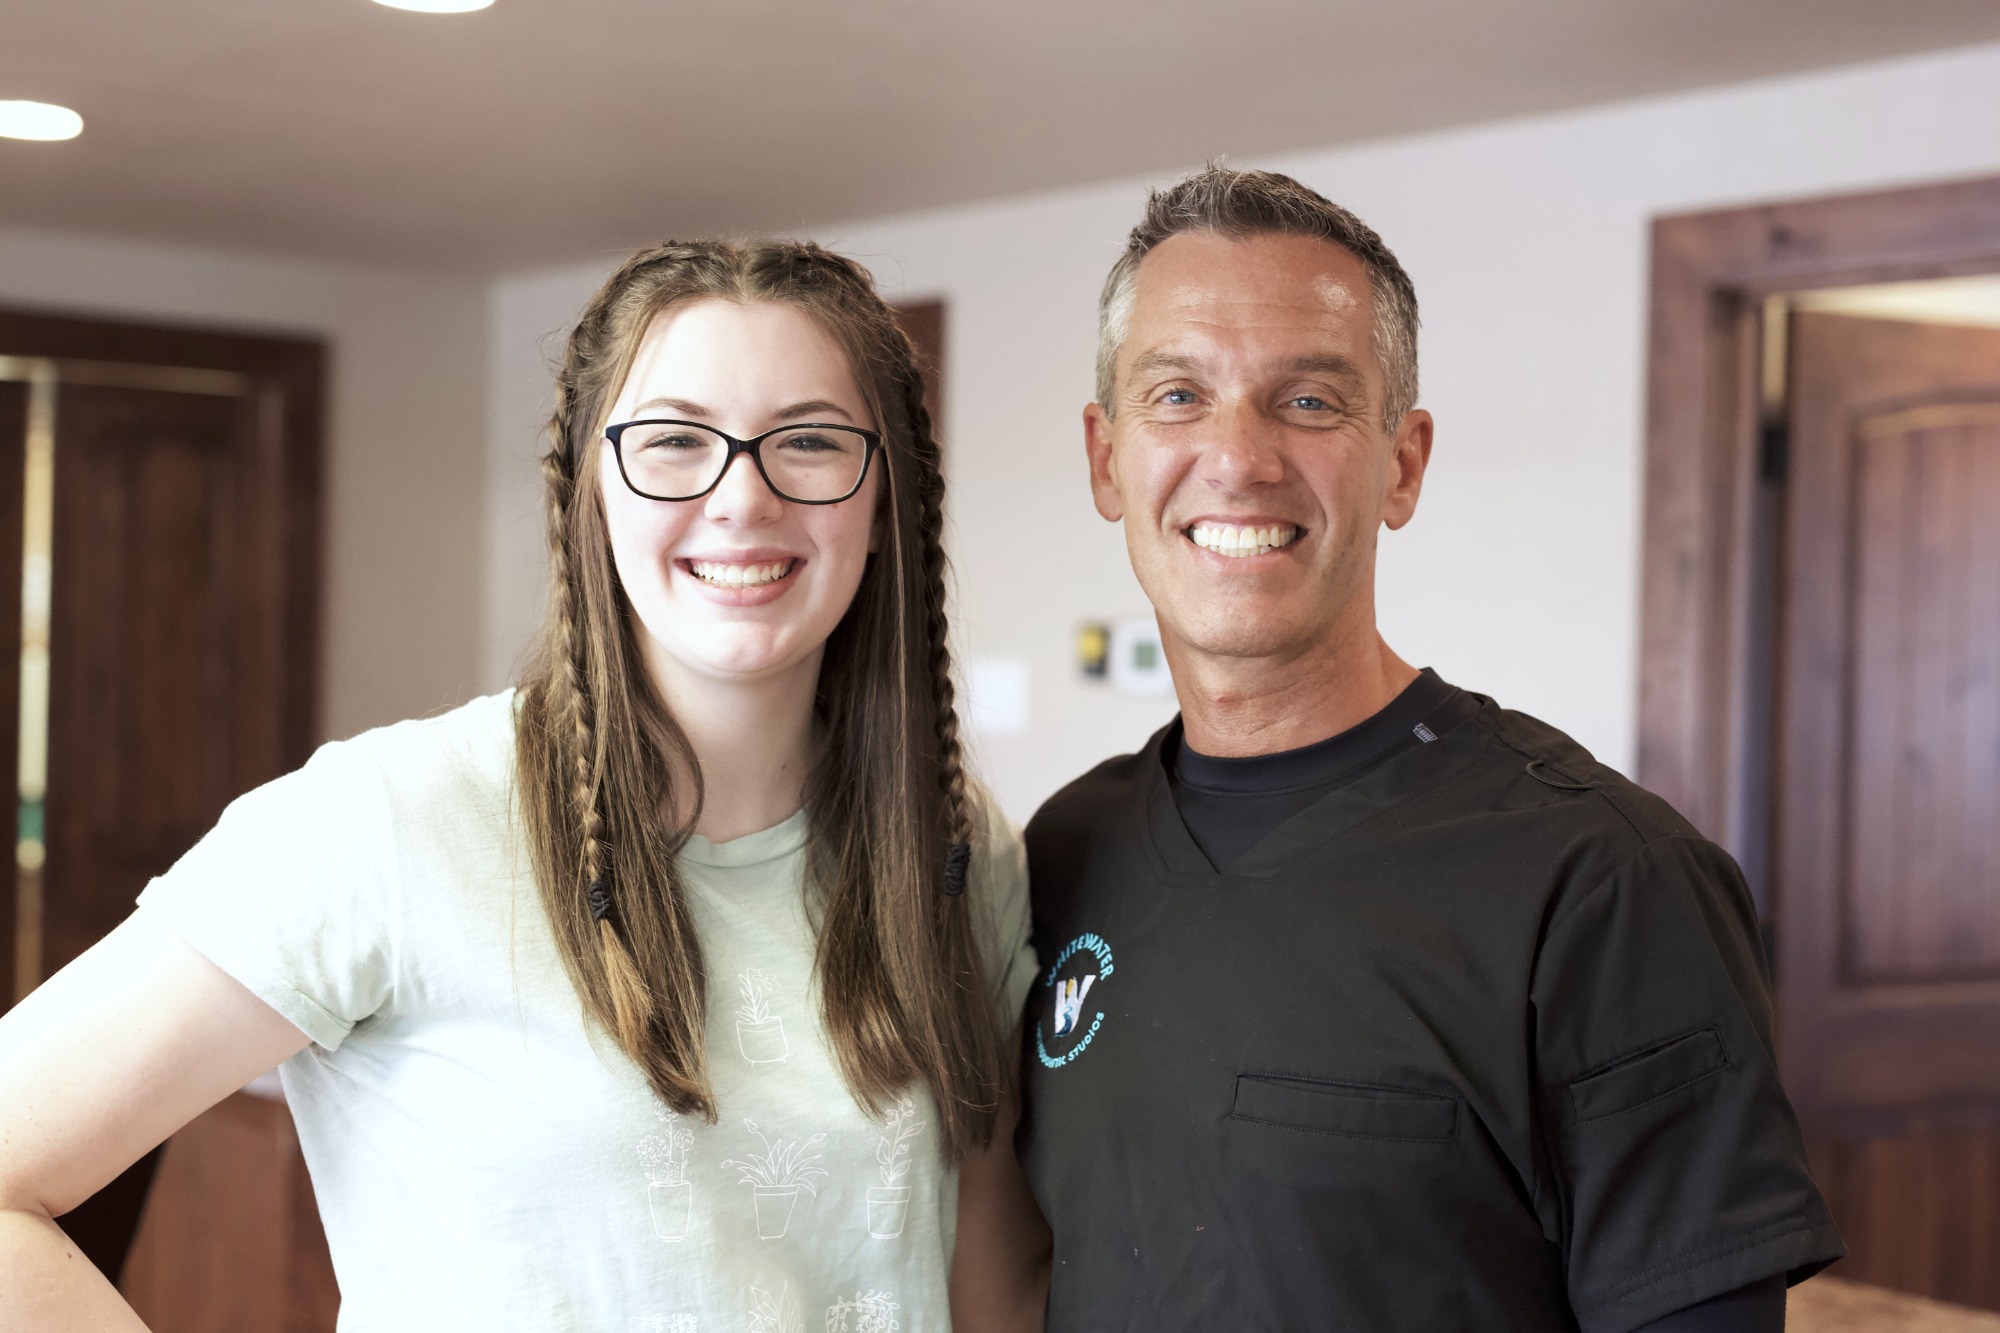 Dr. Leavitt and patient smiling Whitewater Orthodontic Studios in Tacoma, WA.